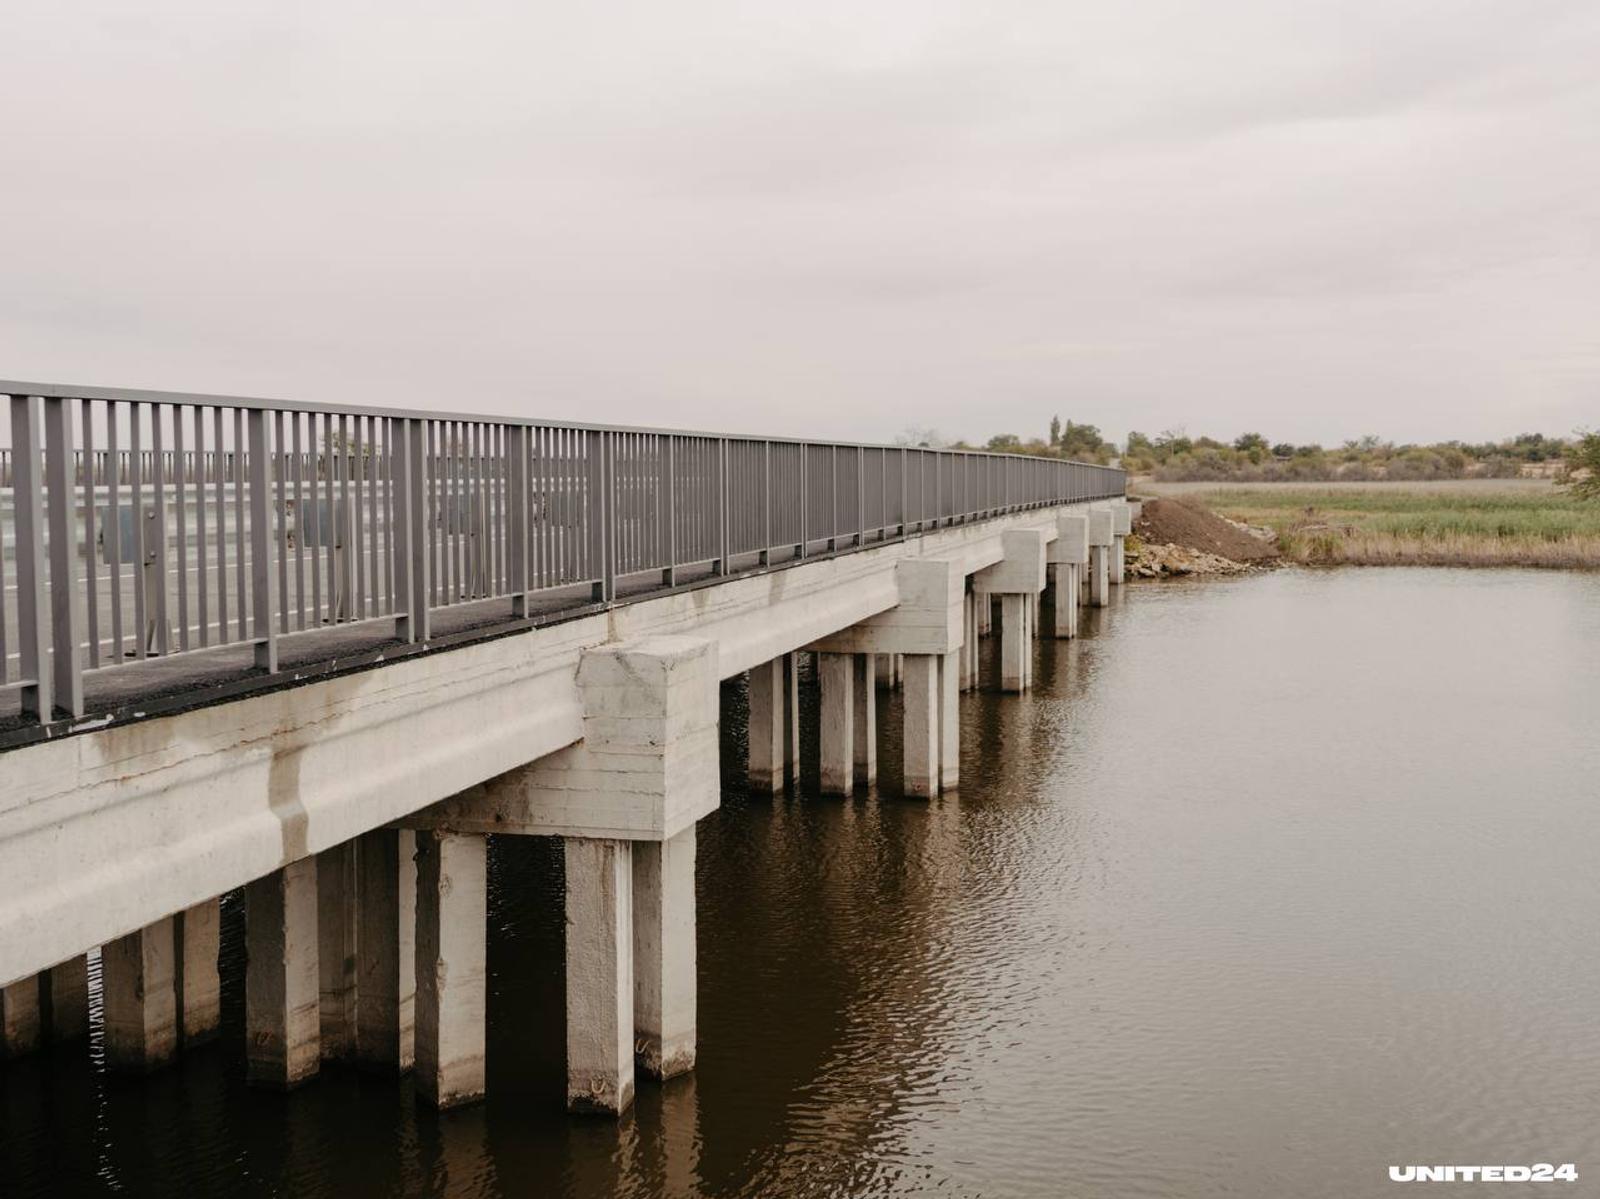 The largest bridge across the Inhulets River was opened in Mykolaiv Oblast